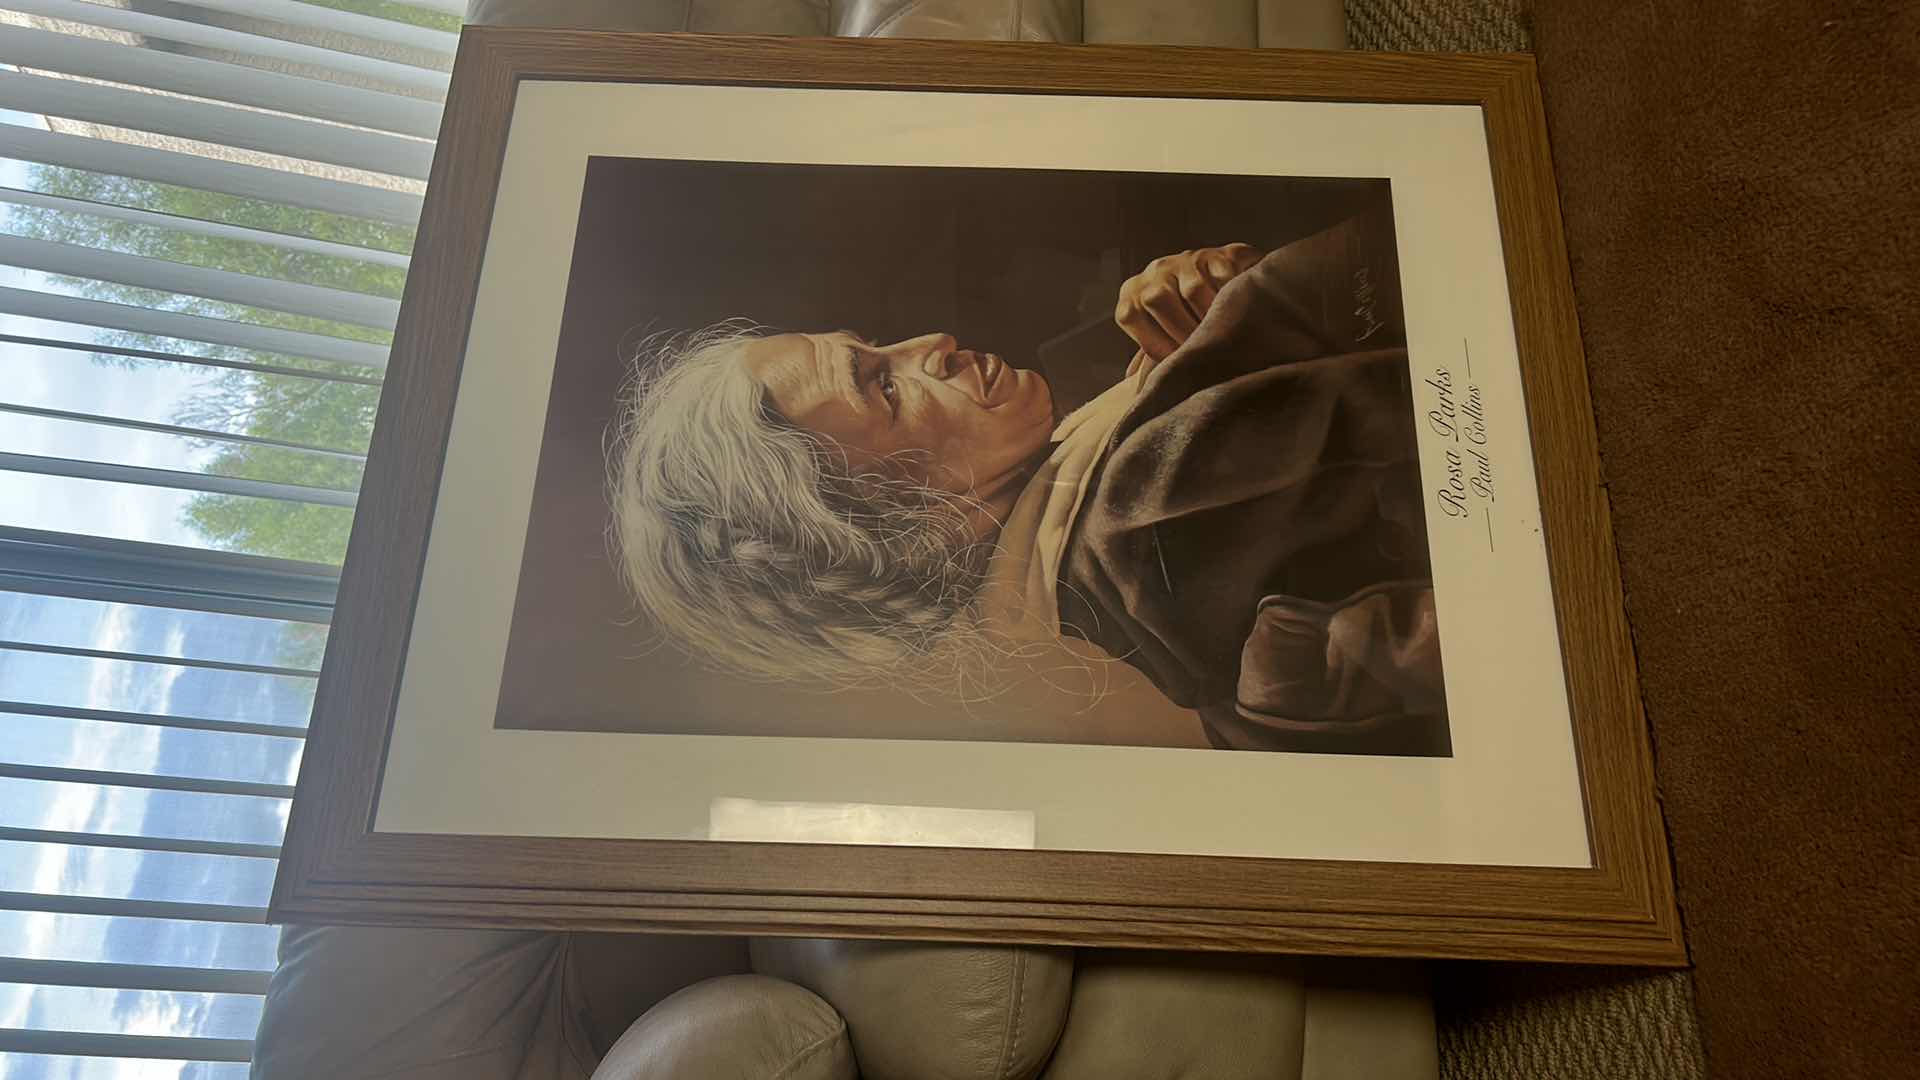 Photo 5 of ROSA PARKS BY PAUL COLLINS FRAMED ARTWORK 25 1/2” x 31 1/2”